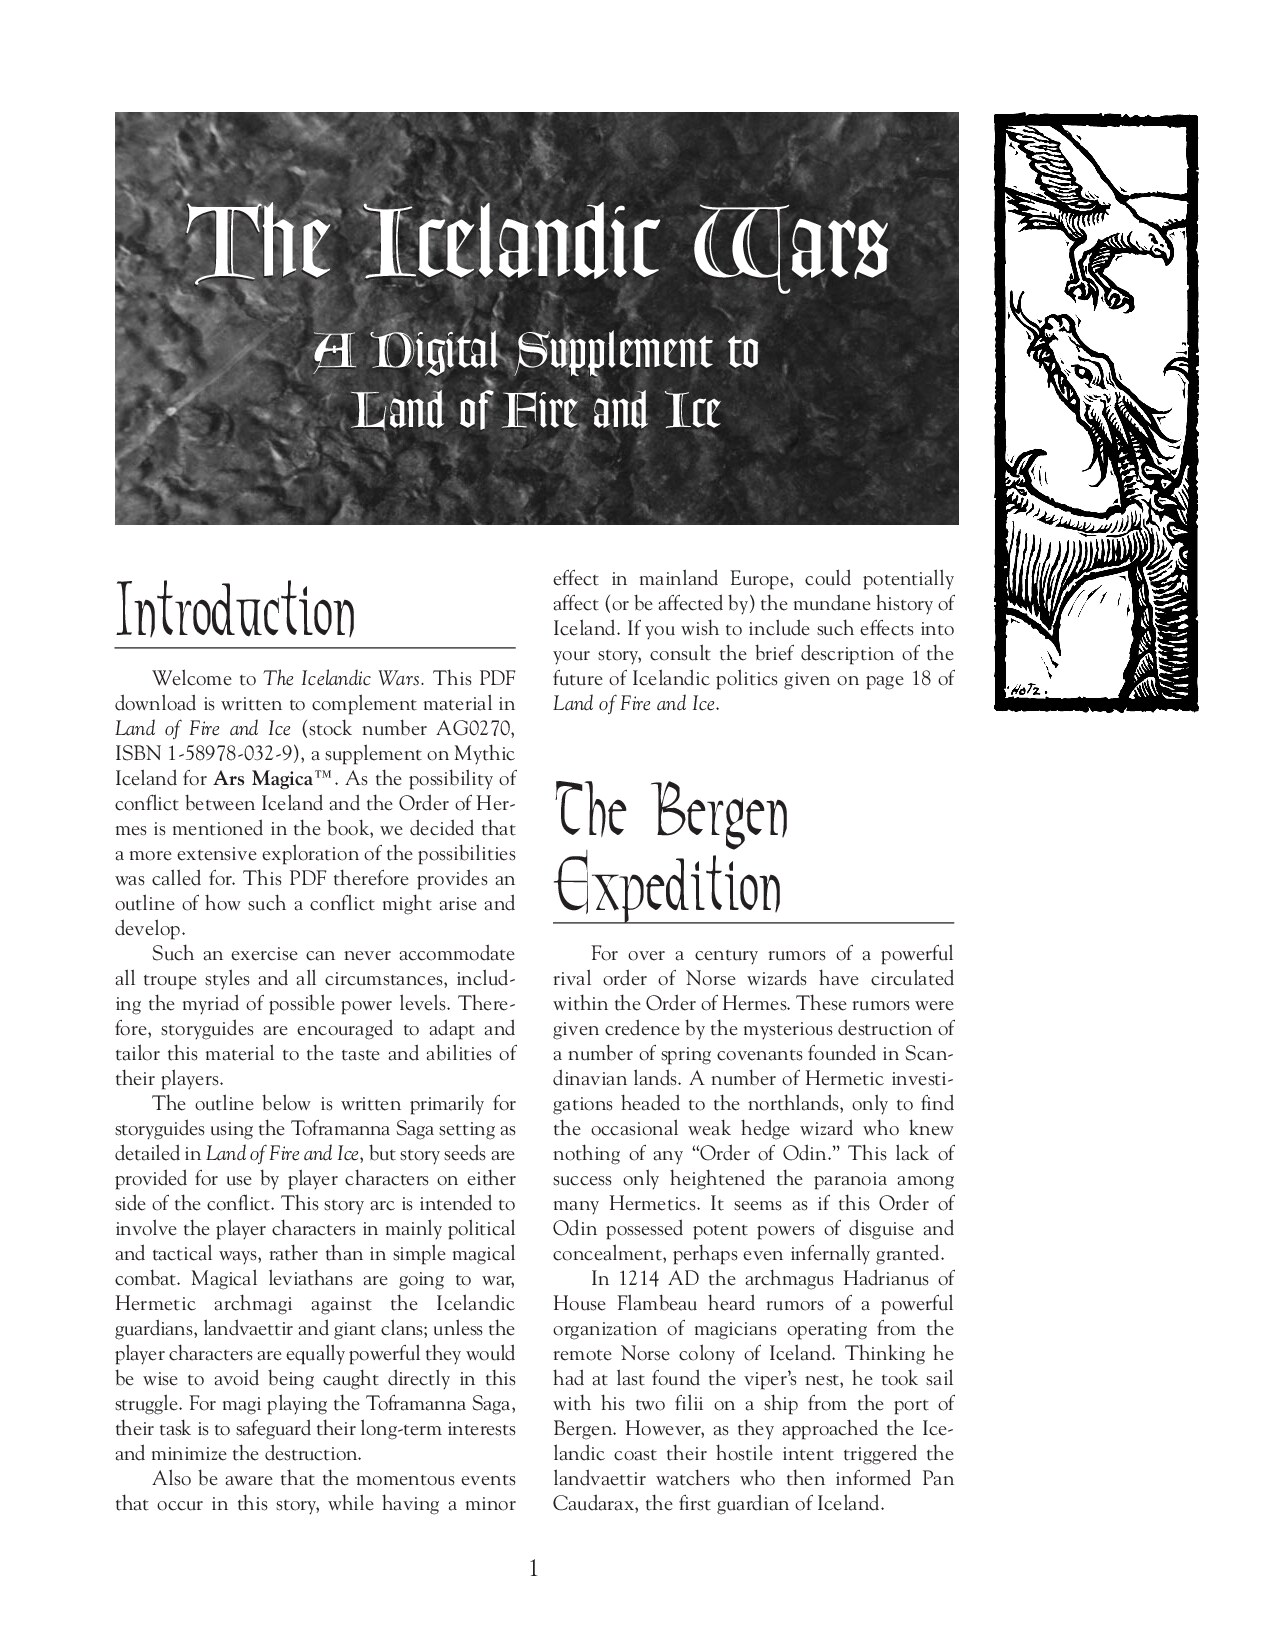 Ars Magica - 4th - Land of Fire and Ice - Icelandic Wars